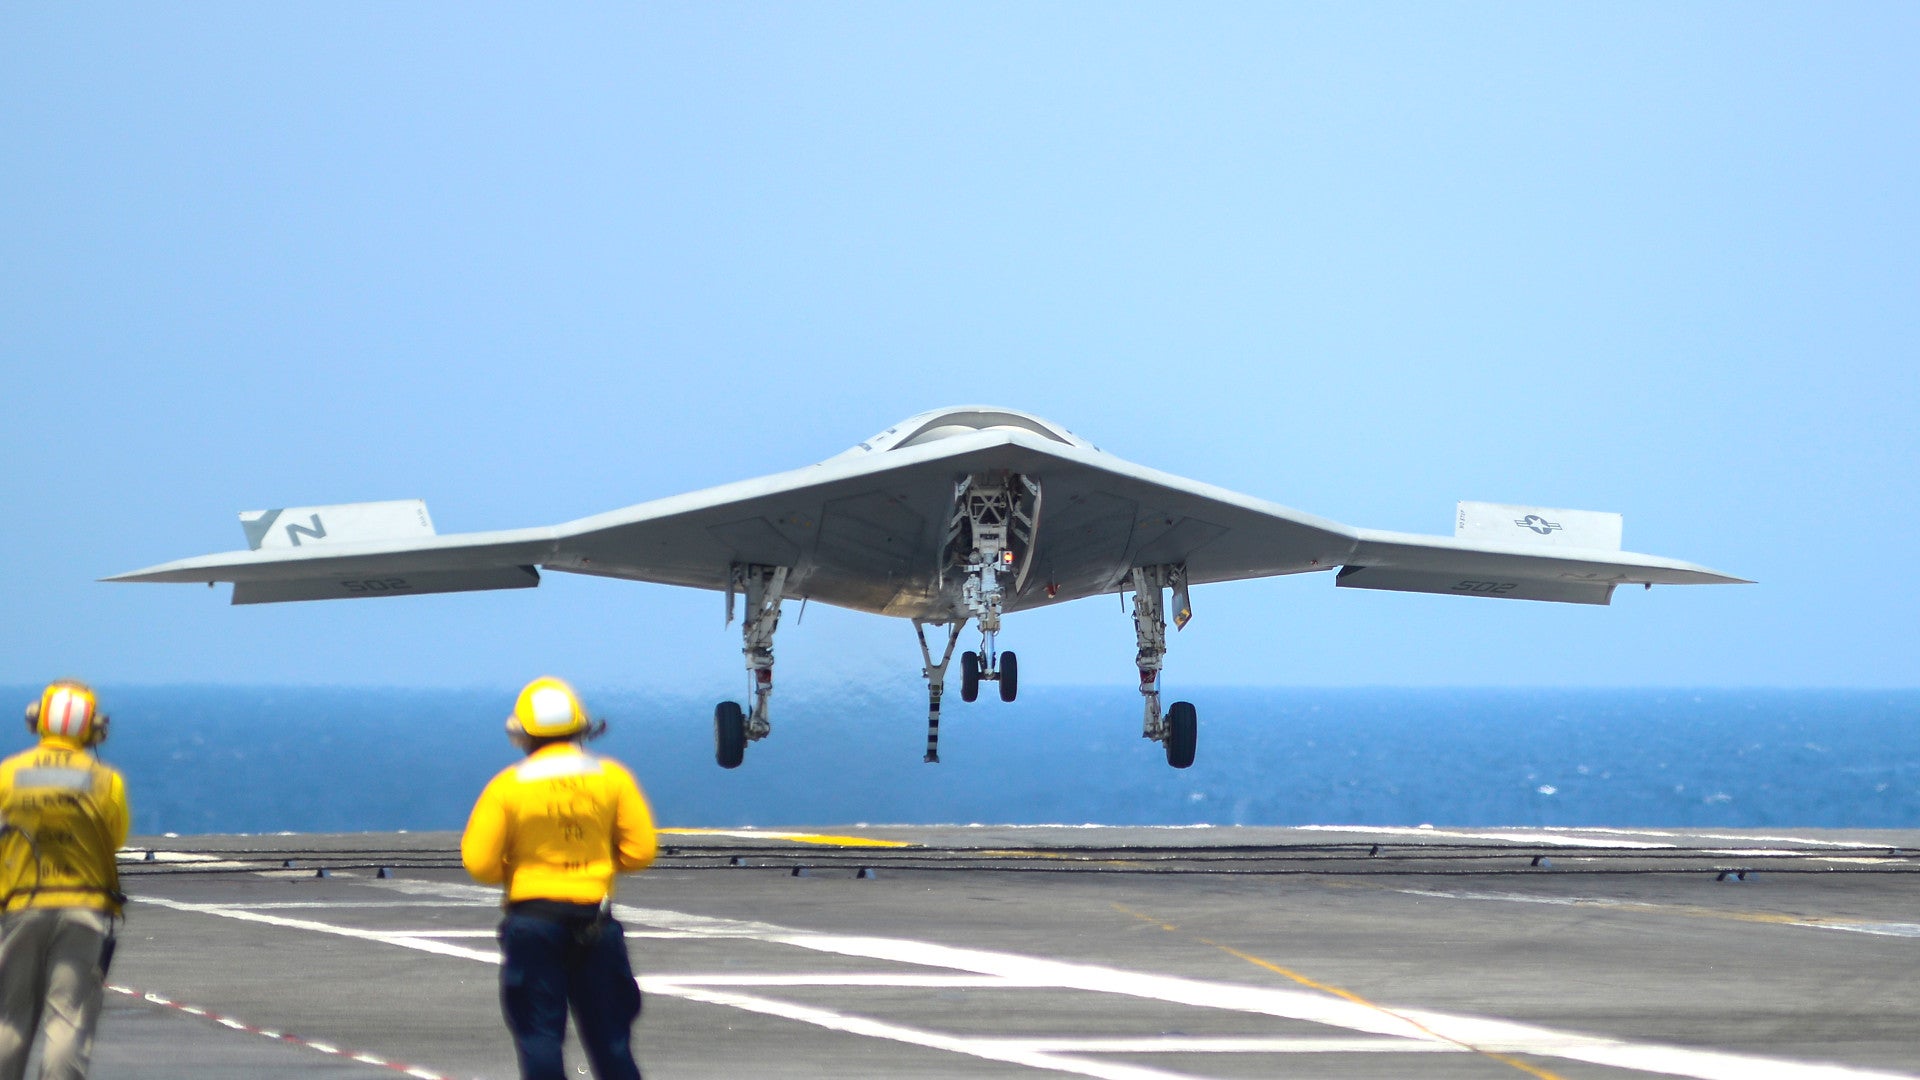 The US Navy May Have Watered Down Its MQ-25 Drone Even More